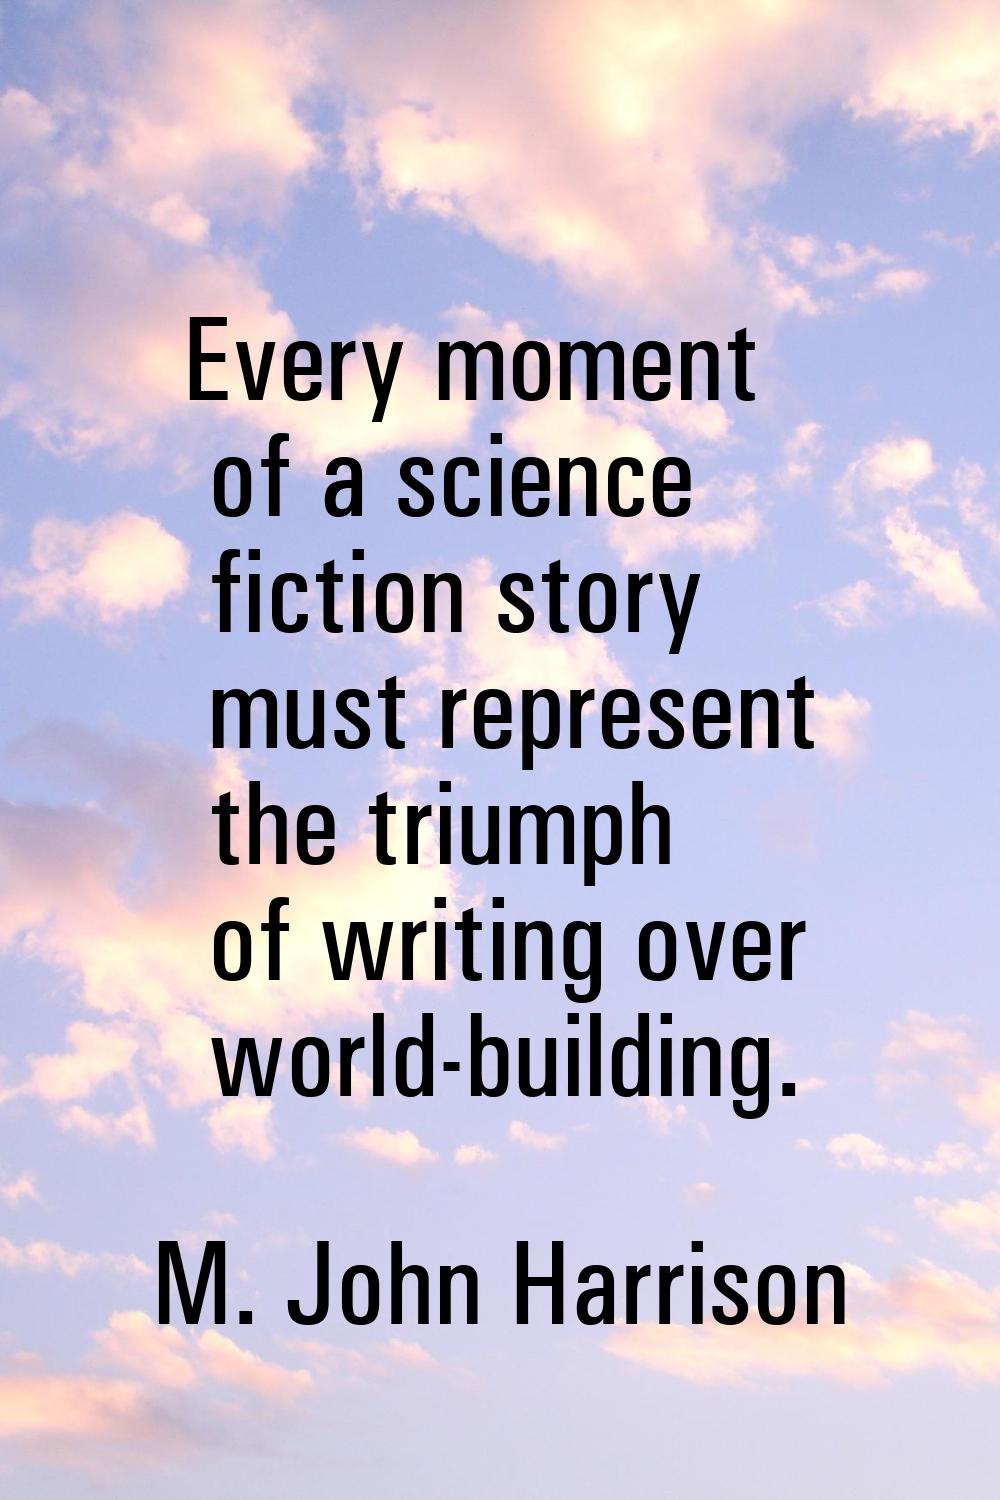 Every moment of a science fiction story must represent the triumph of writing over world-building.